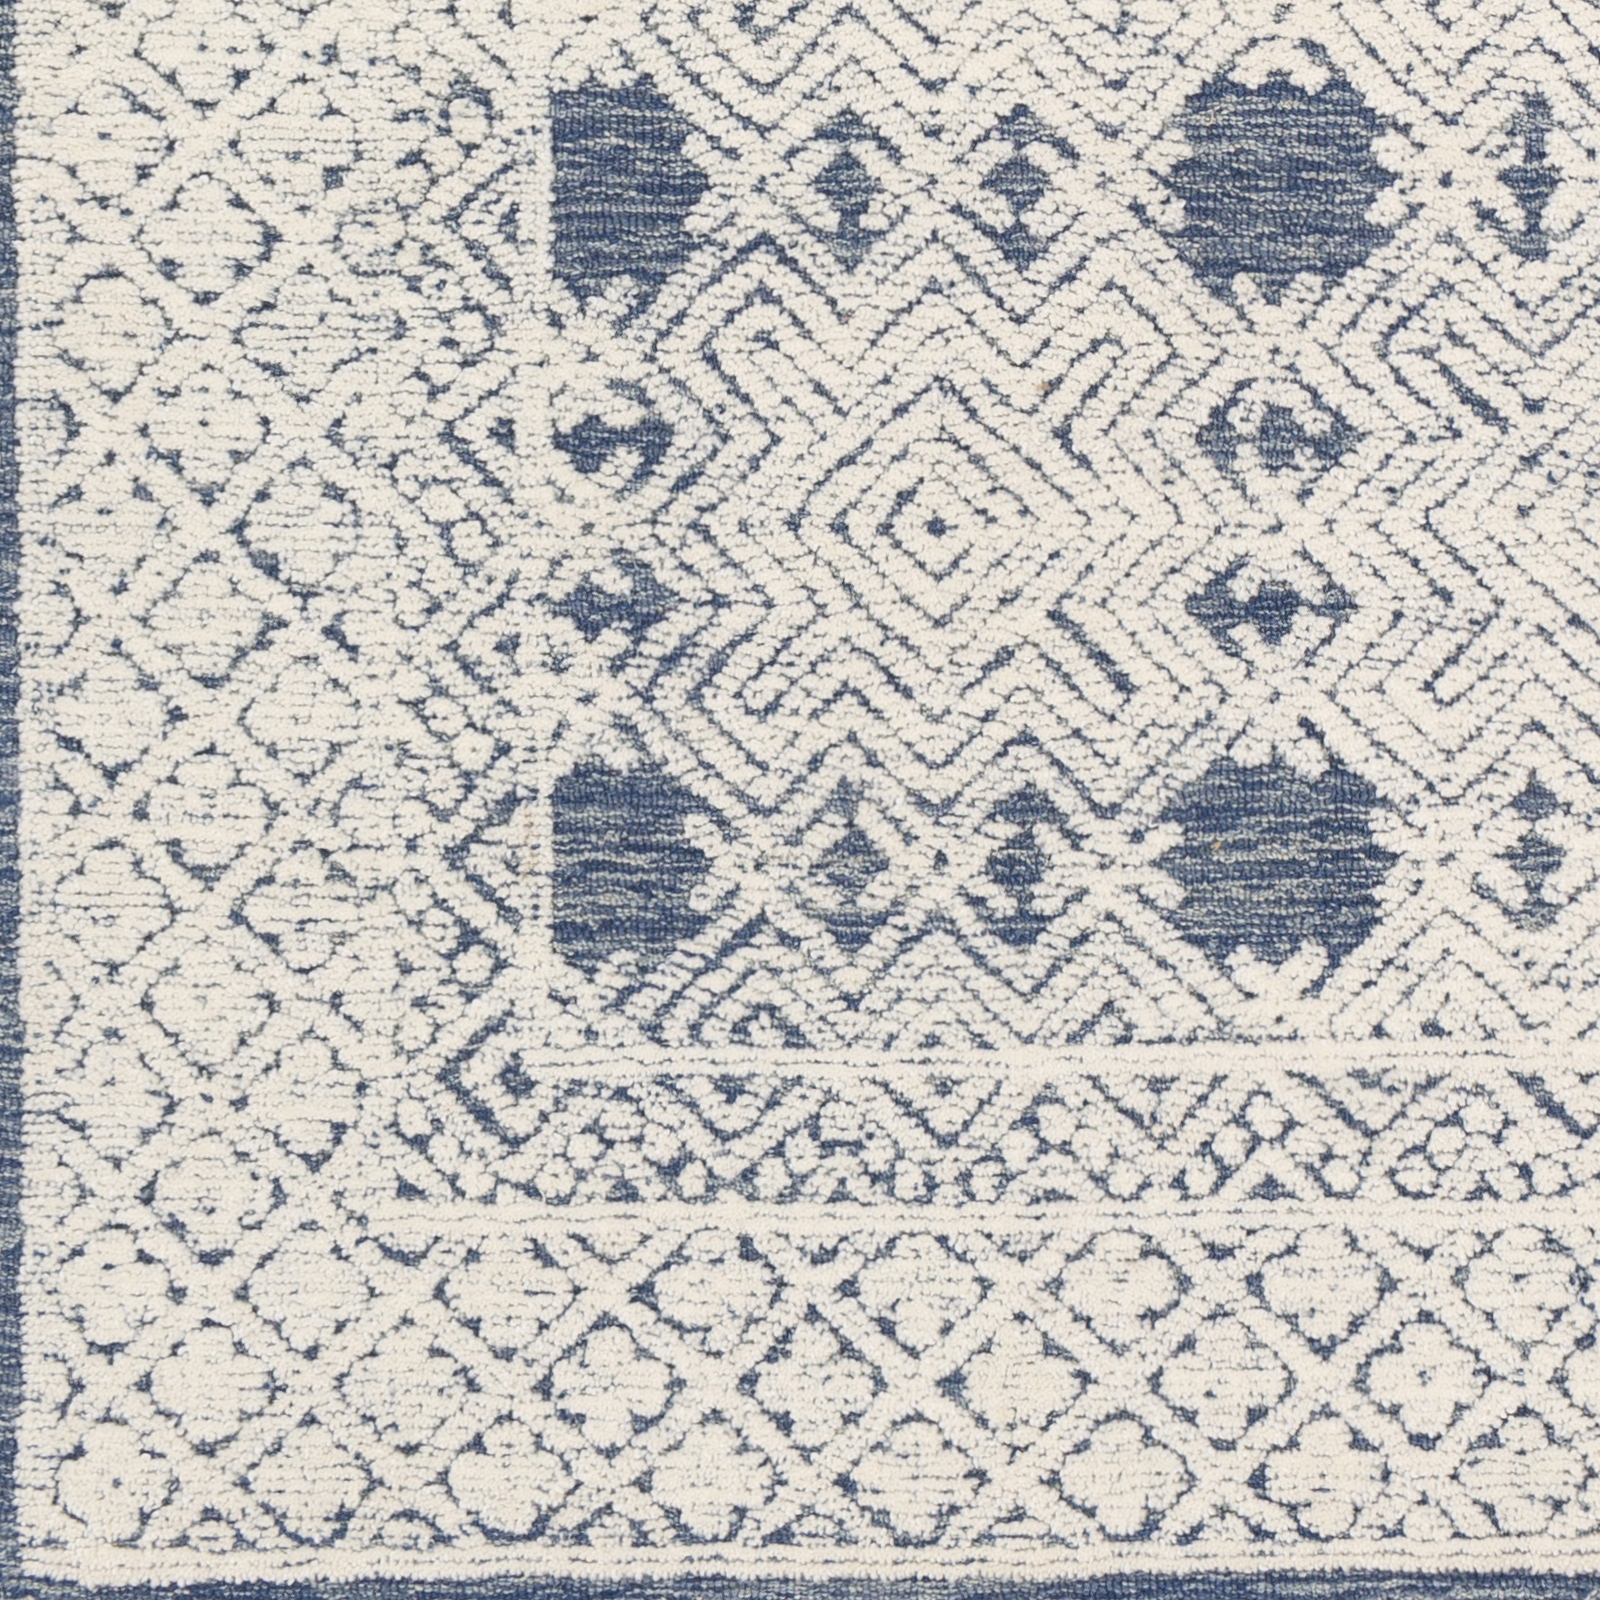 Louvre Rug, 2' x 3' - Image 5